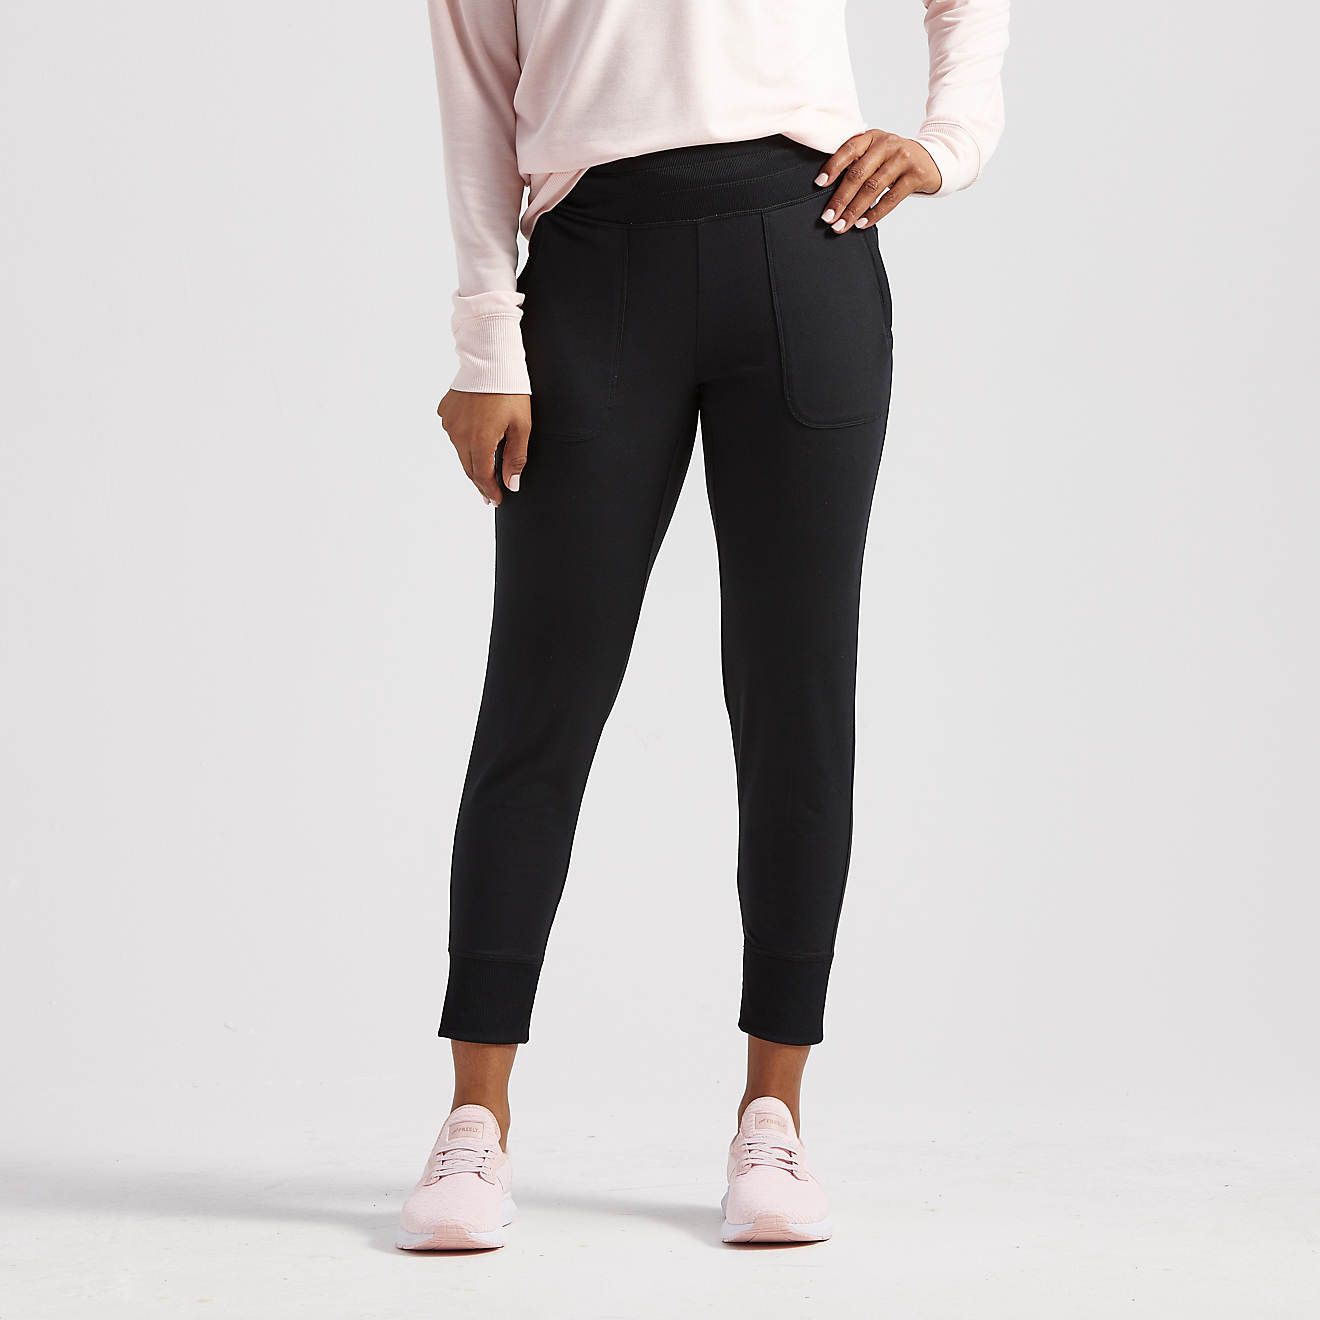 Freely Women's Zip Pocket Jogger Pants | Academy Sports + Outdoor Affiliate